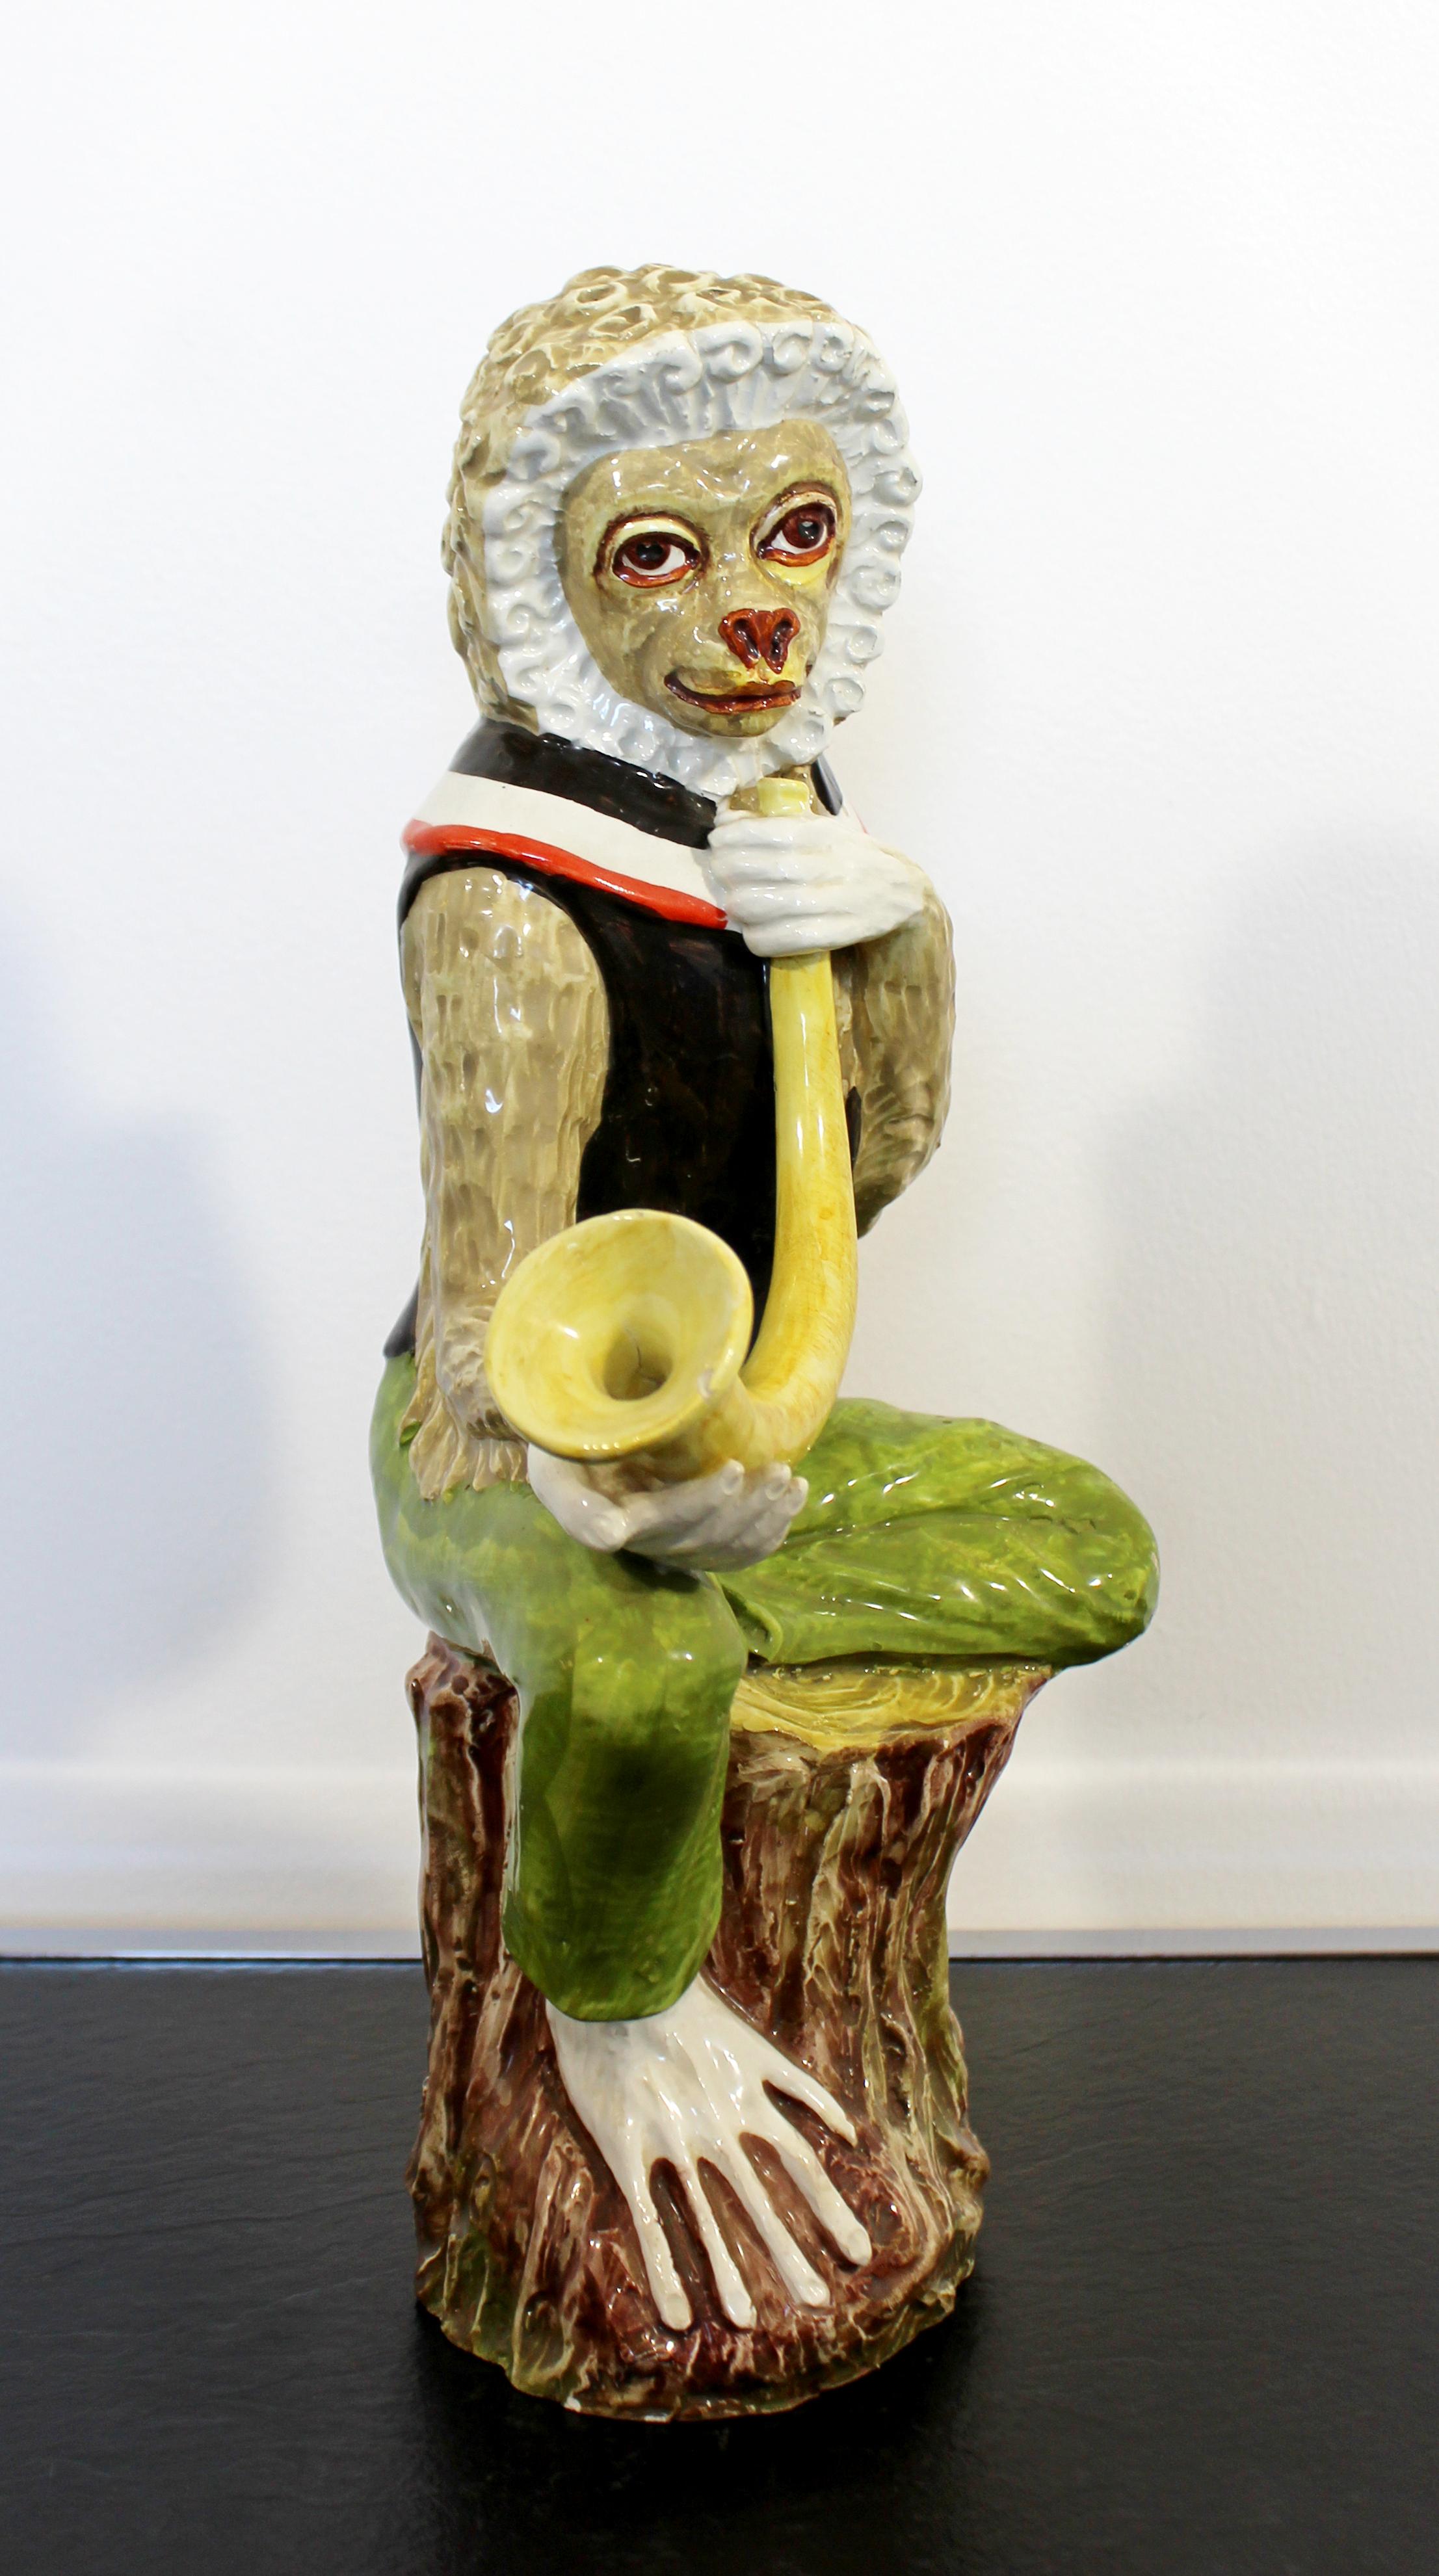 For your consideration is a regal looking, ceramic monkey table sculpture, made in Italy in the 1960s. In excellent vintage condition. The dimensions are 8.5